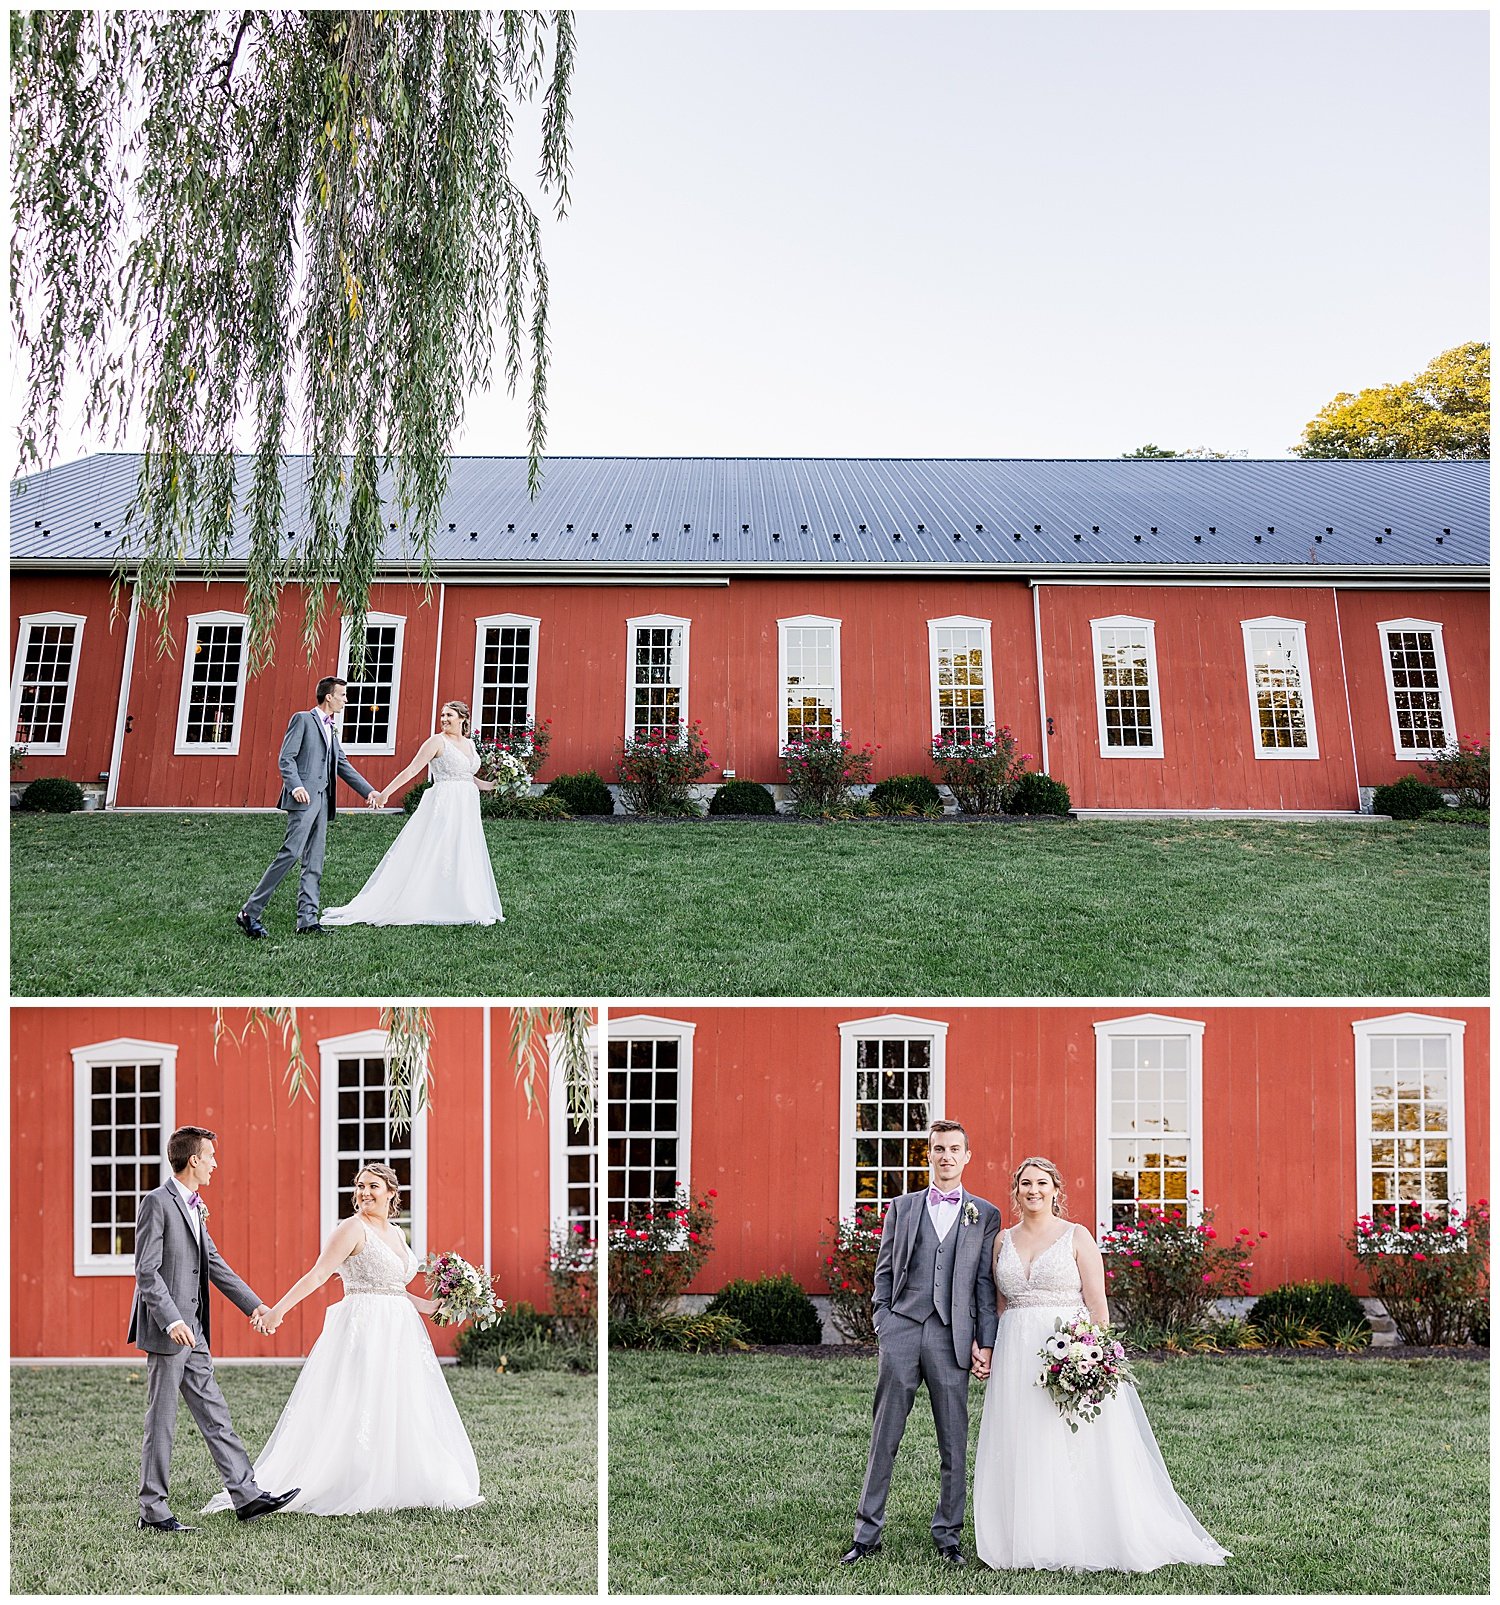 Therese Dan Married Pond View Farm Wedding Living Radiant Photography Blog_0055.jpg